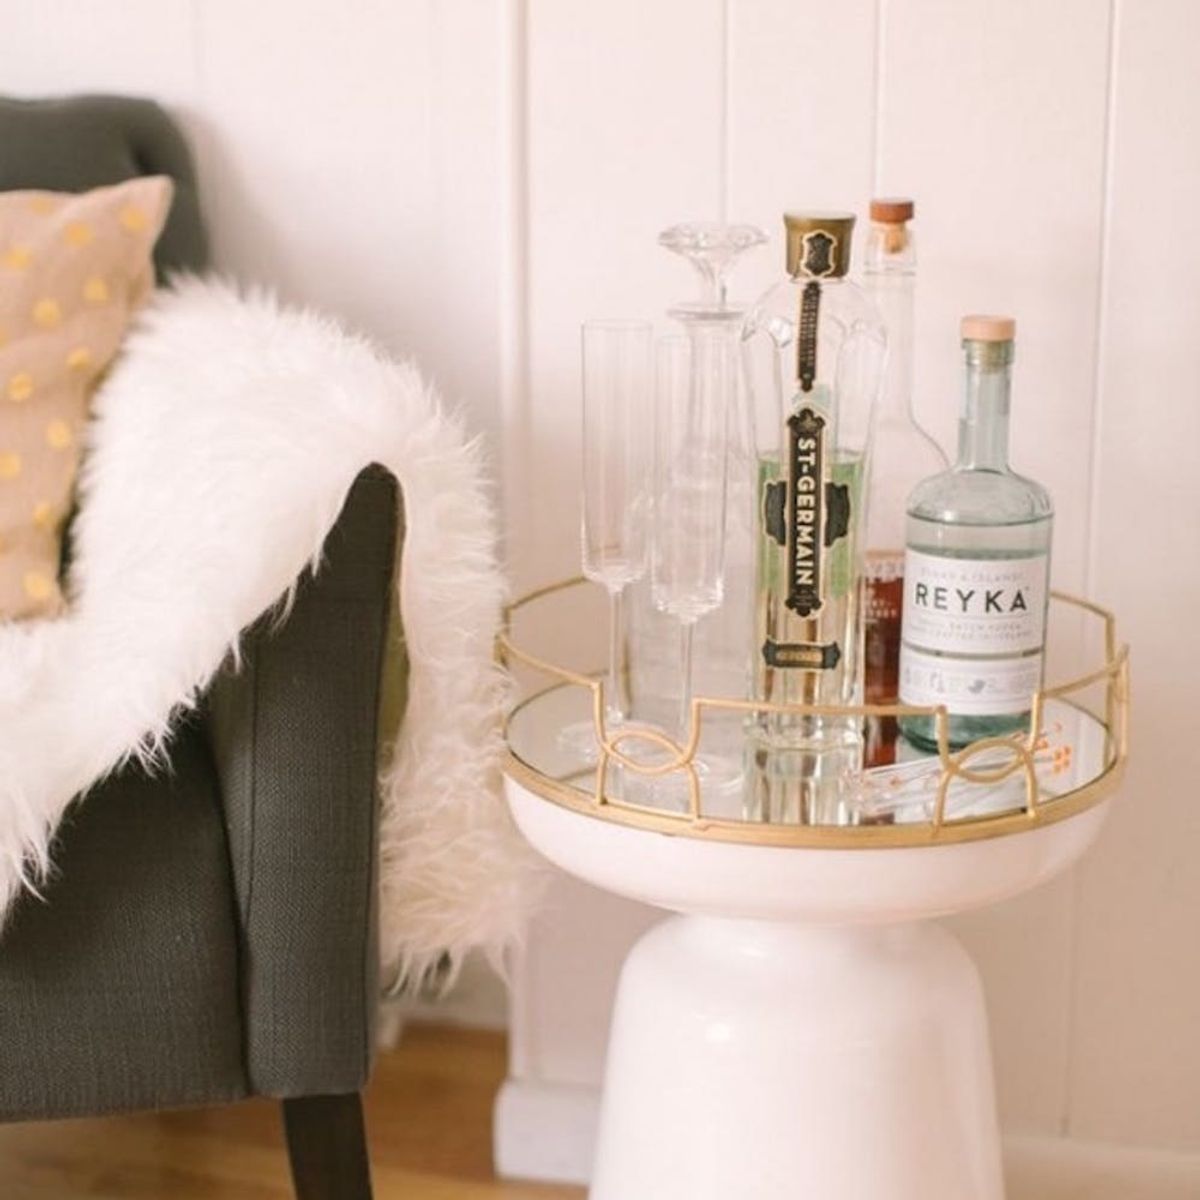 17 Unique Ways to Store Booze That Don’t Include a Bar Cart